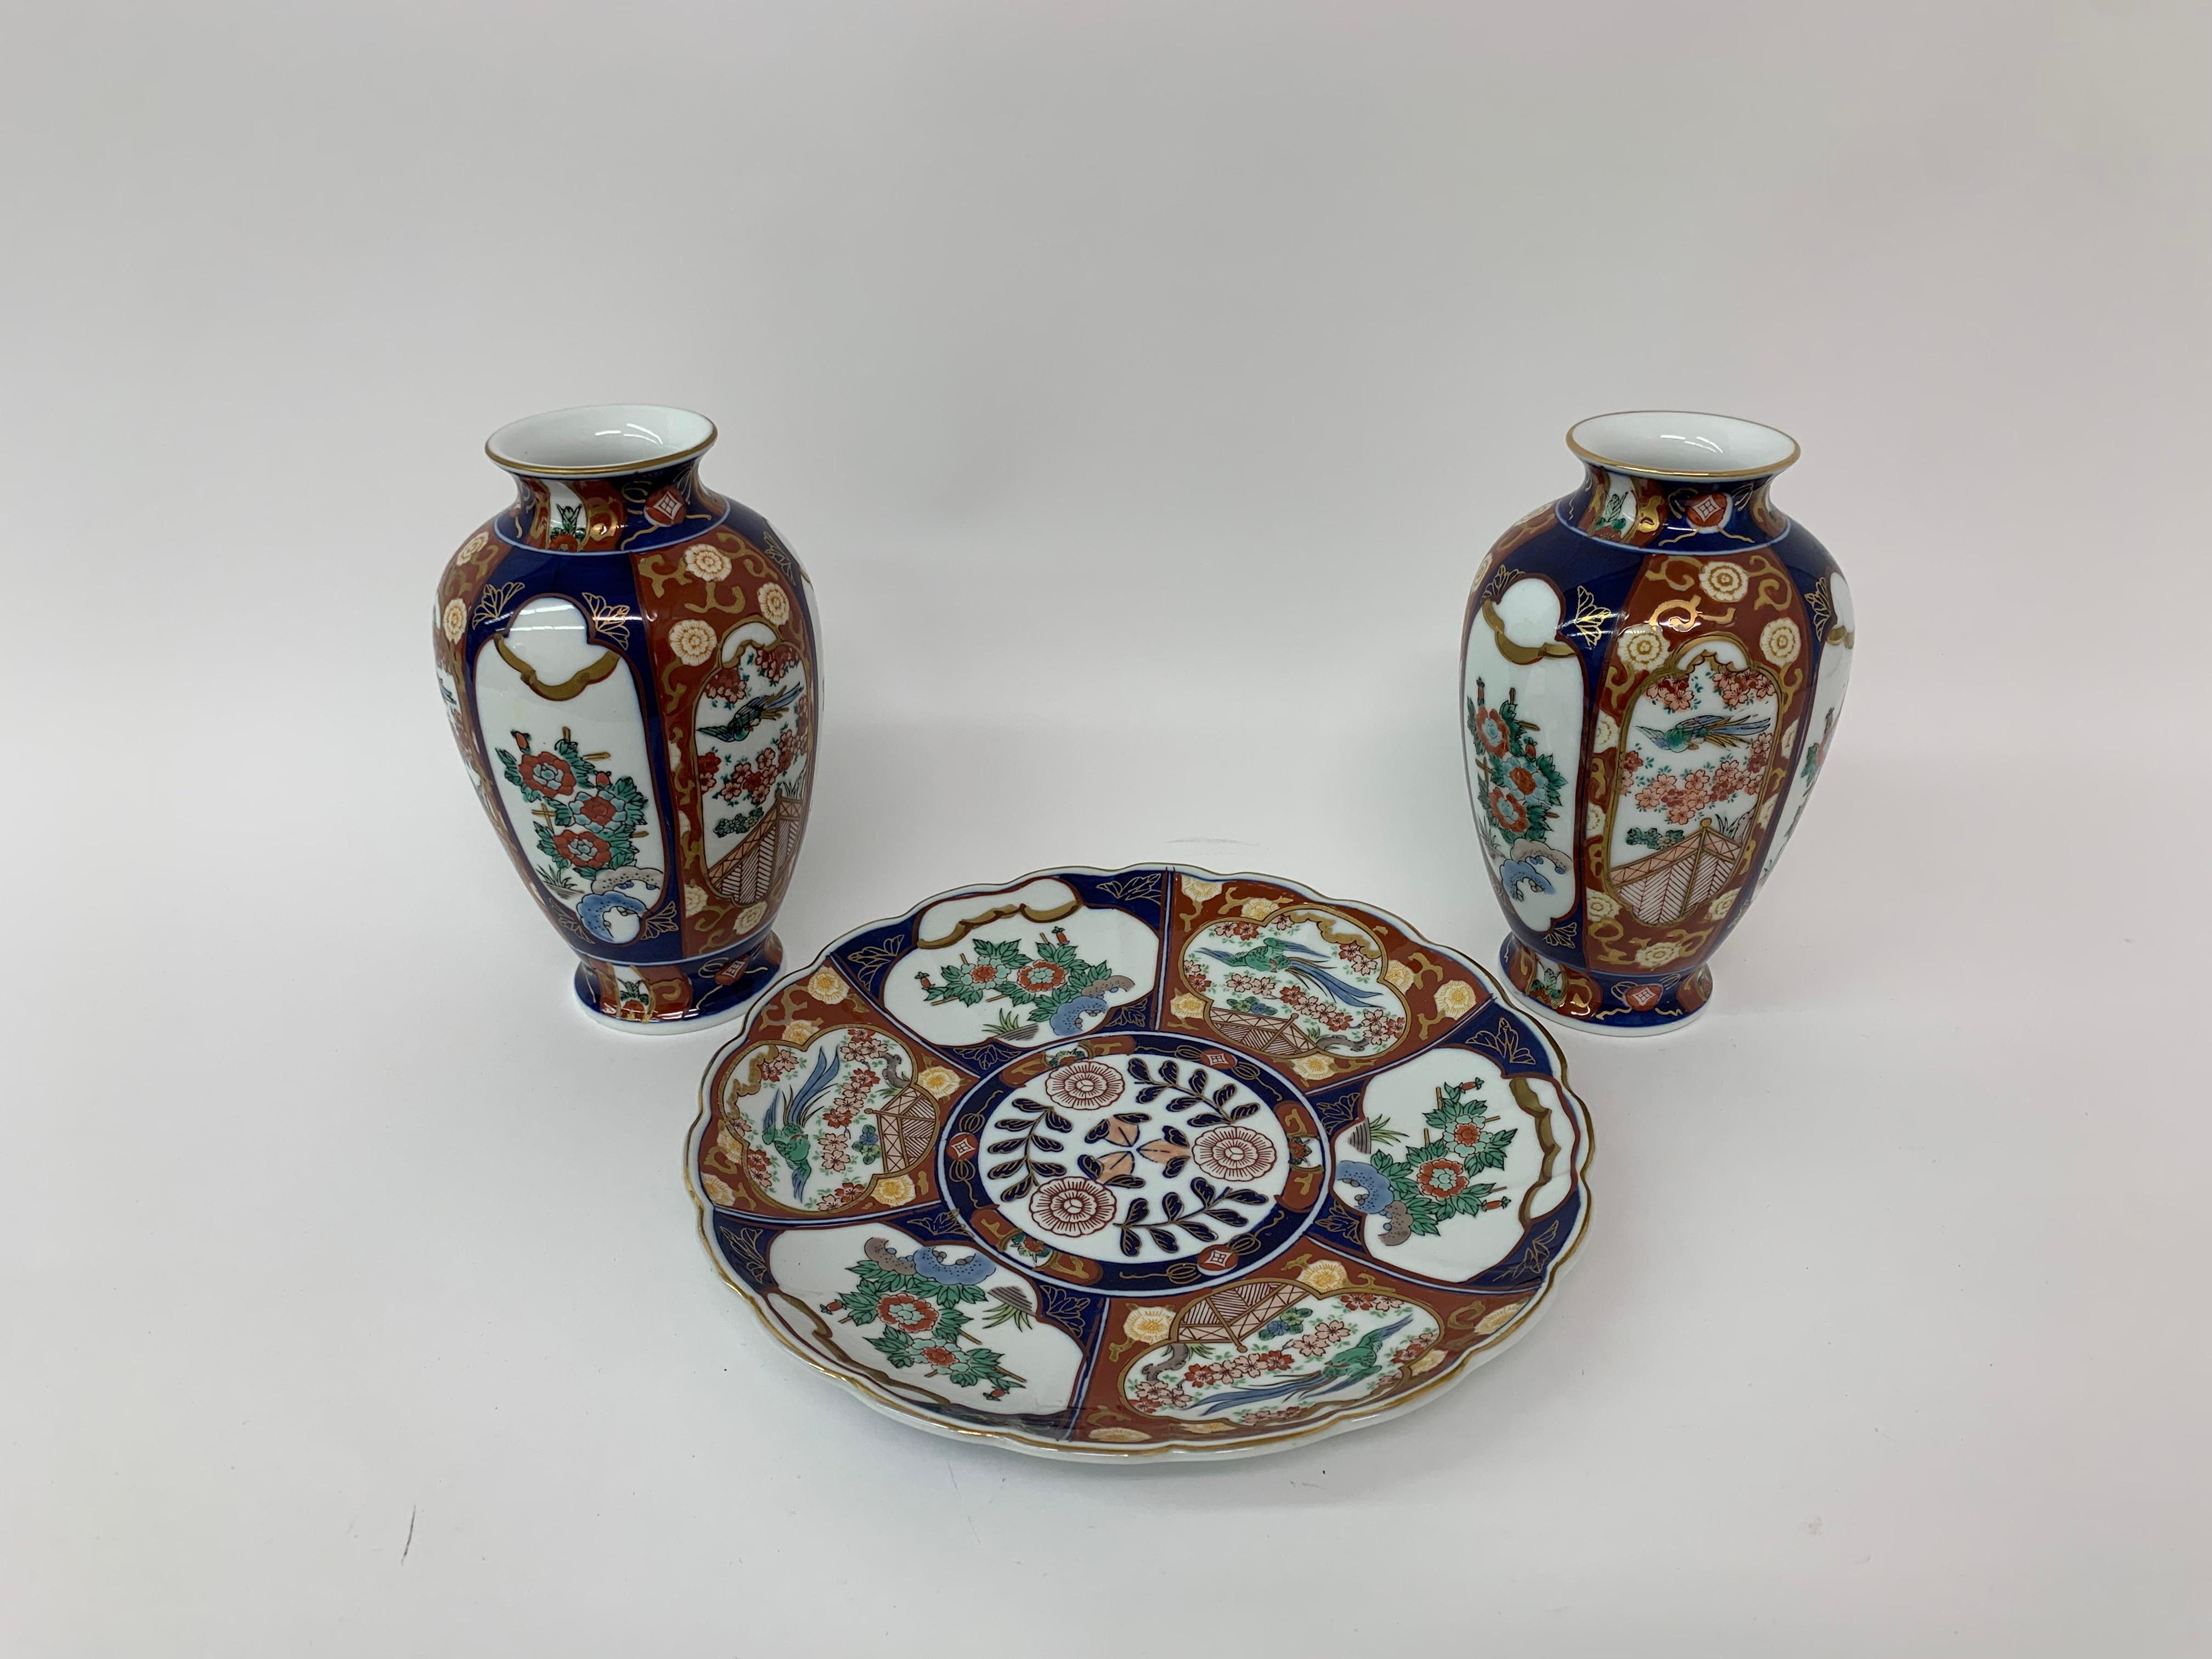 All items are in a mint condition. Dimensions: Vases: 21cm height, 12cm diameter Plate: 27,5cm diameter, 4cm height.
 